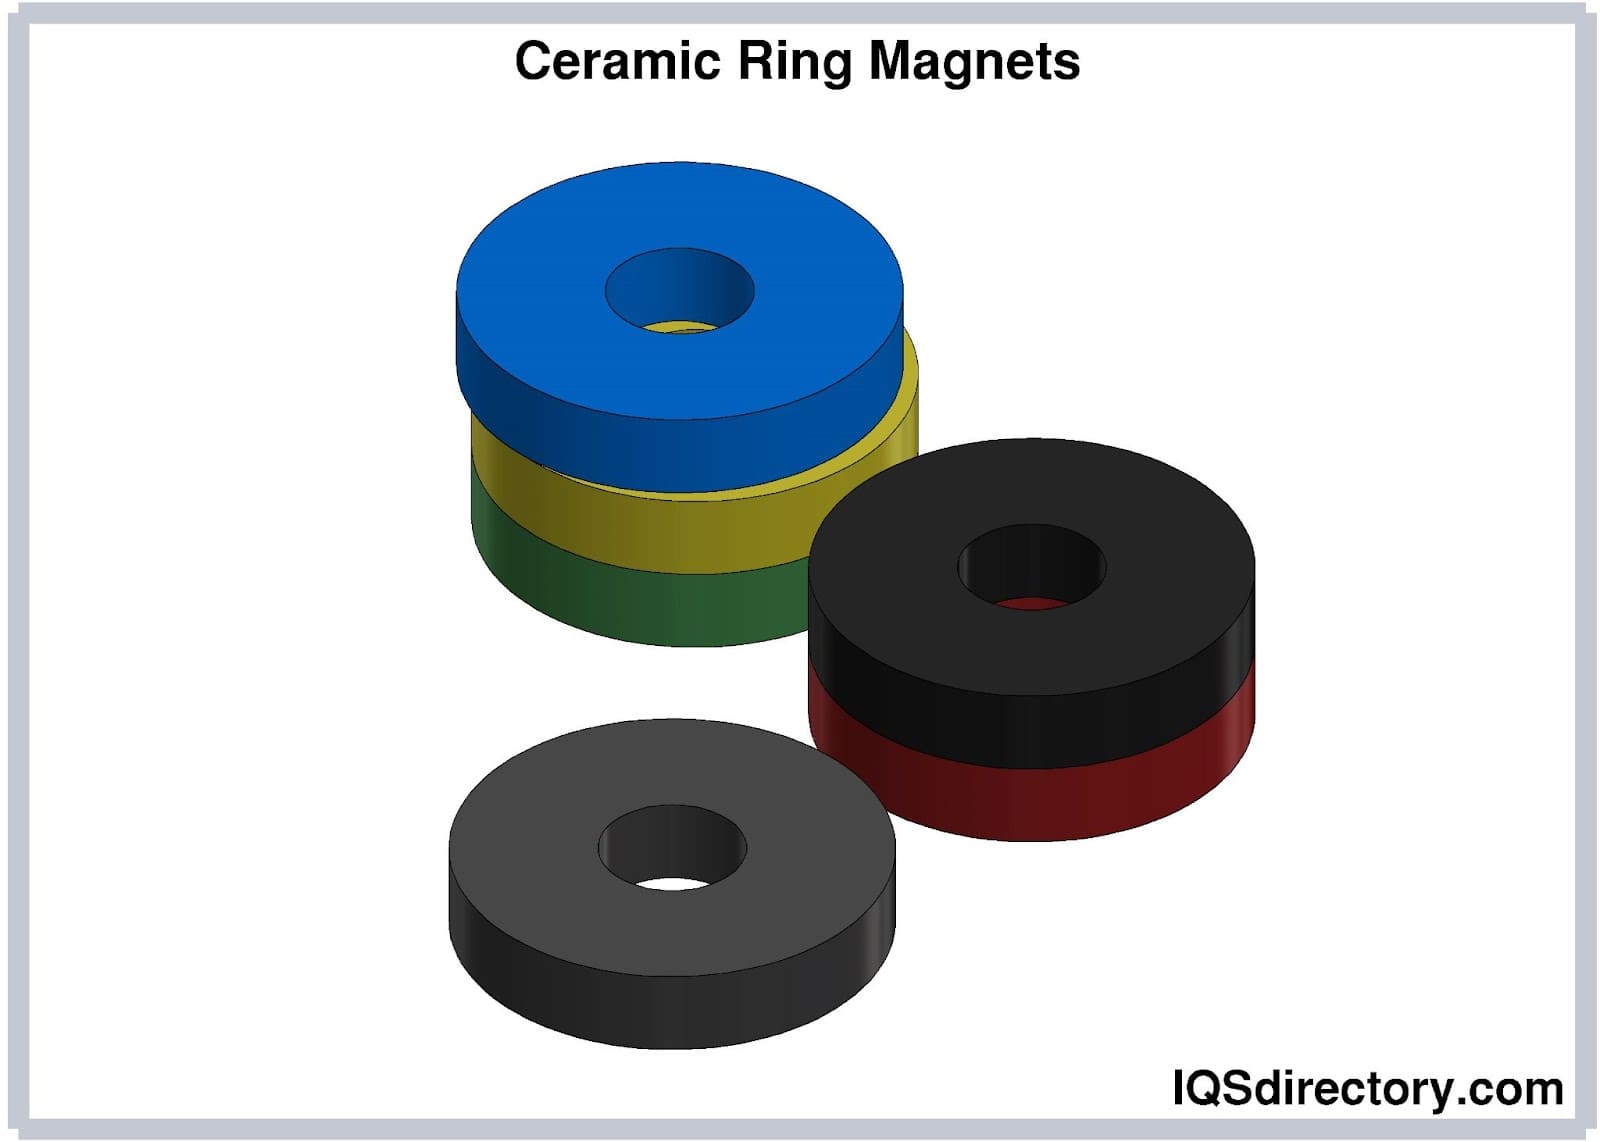 Ceramic Magnets: Types, Uses, Features and Benefits